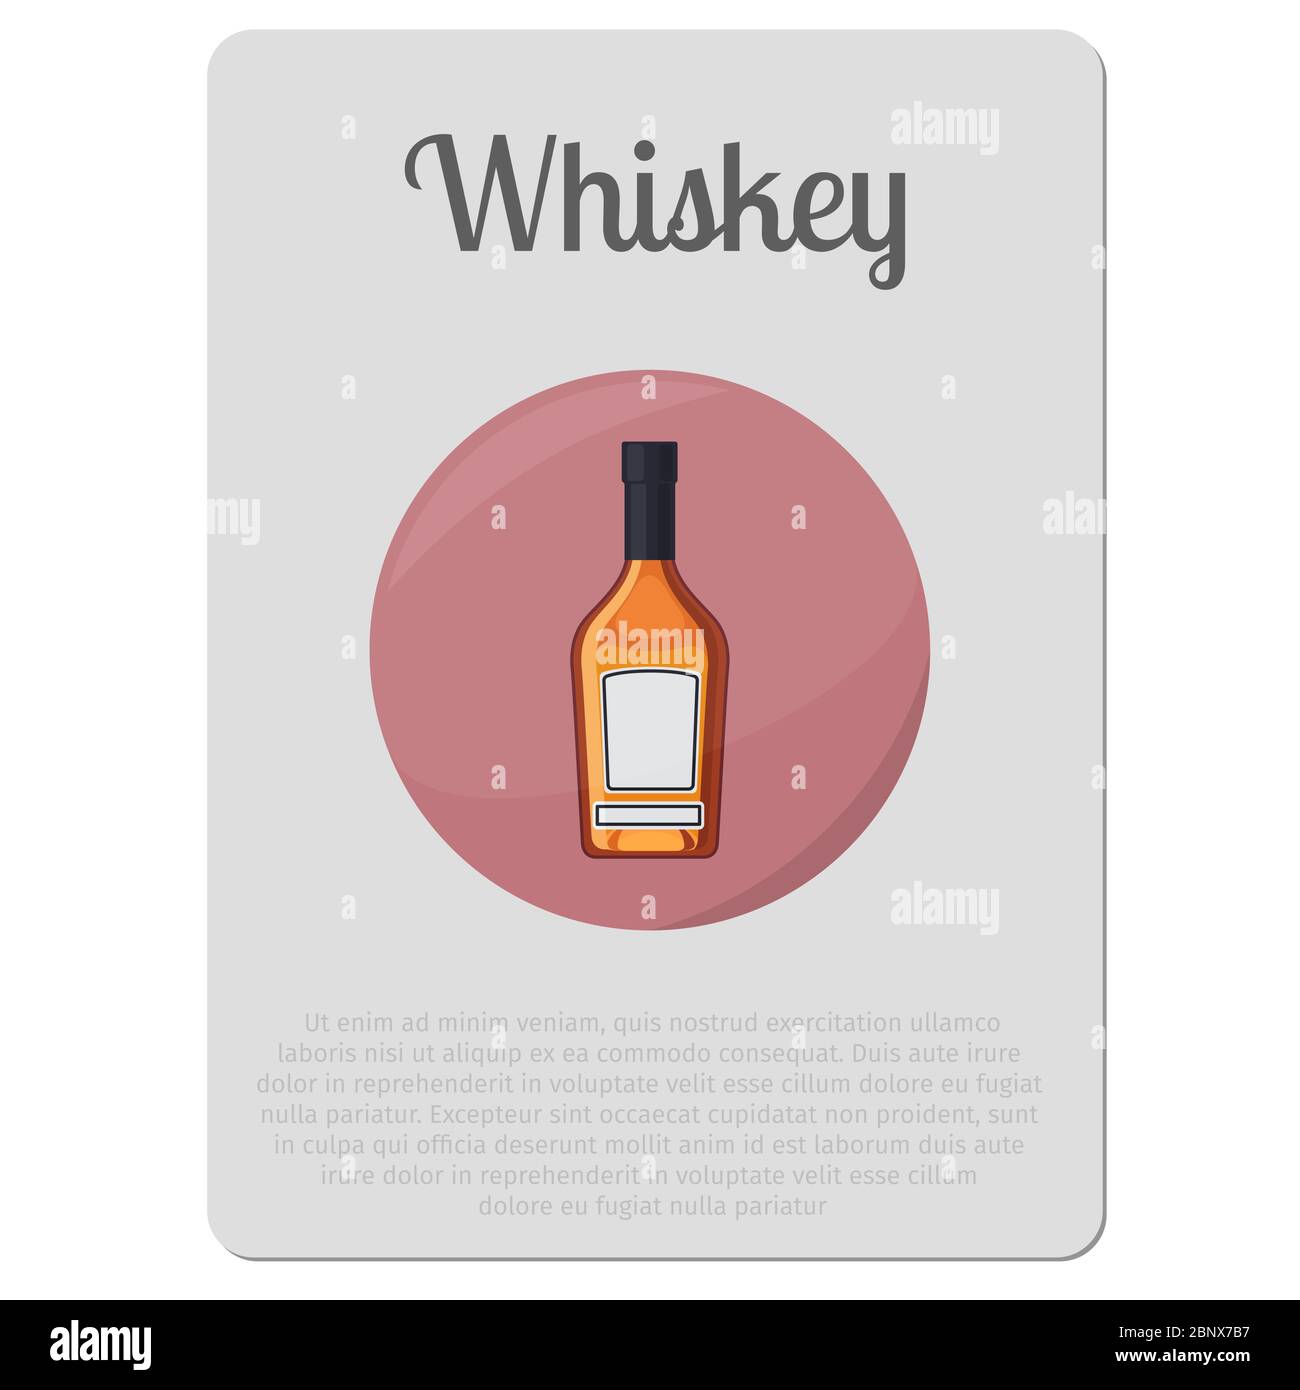 Whiskey alcohol. Sticker with bottle and description vector illustration Stock Vector